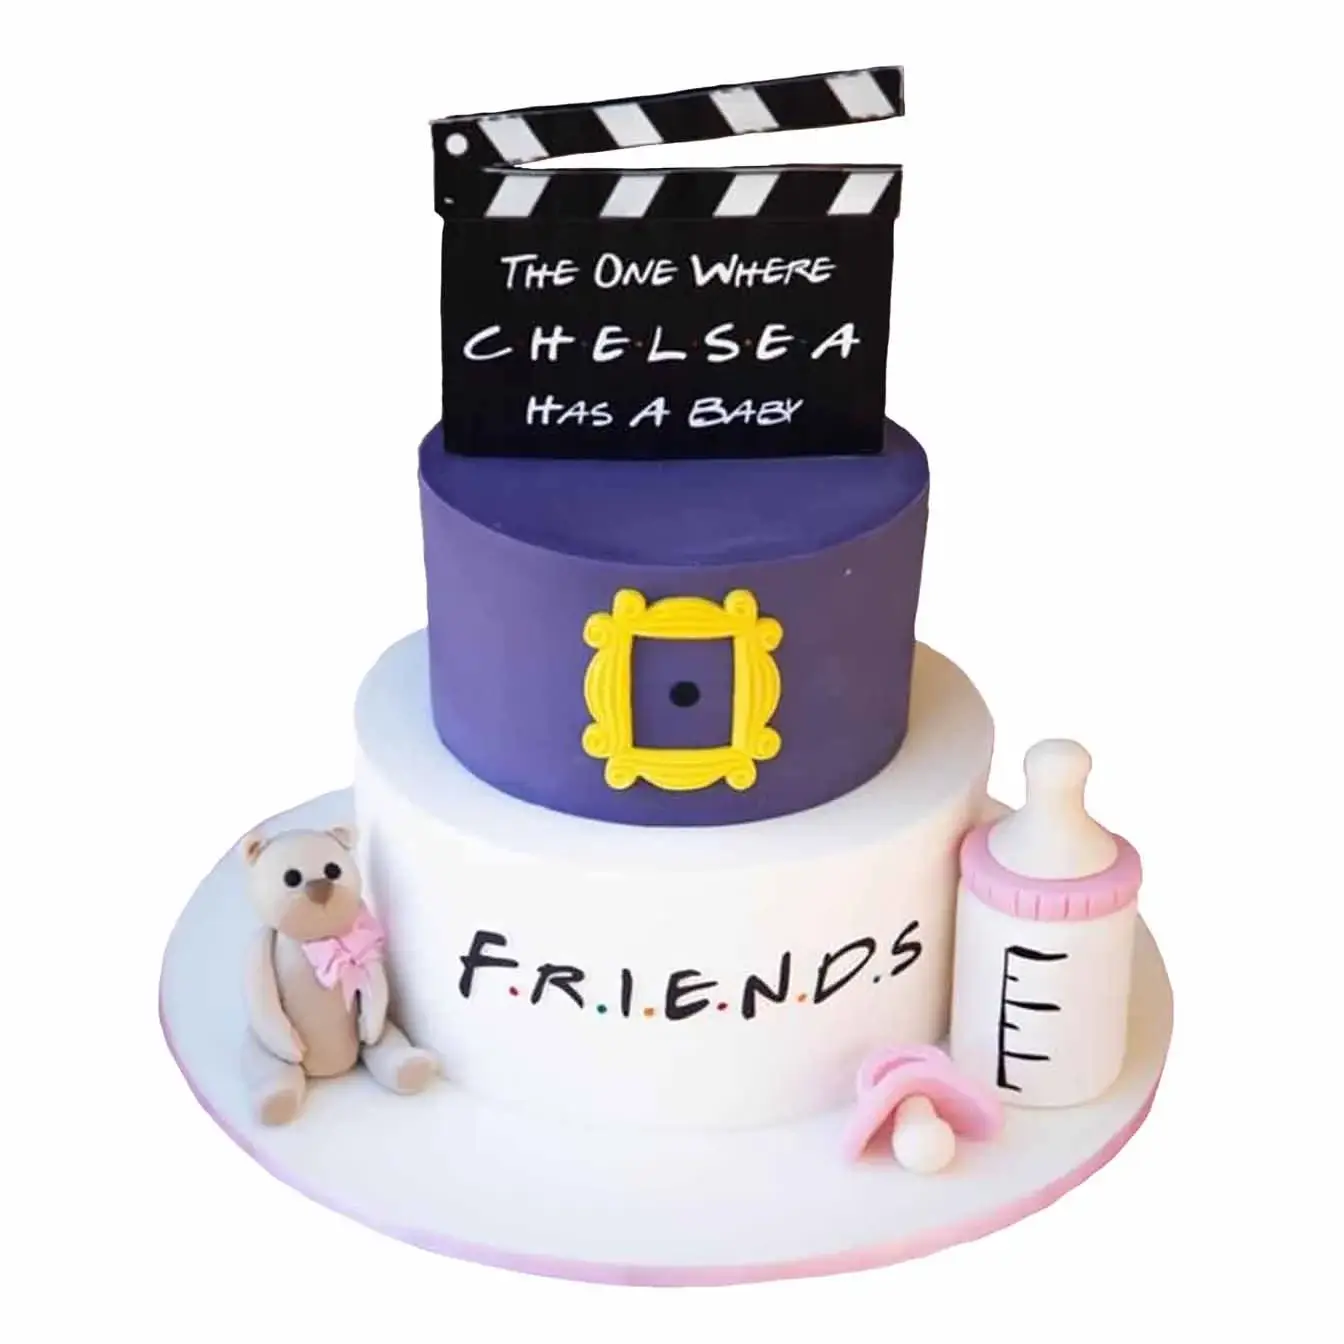 The One Where Chelsea Has a Baby" Baby Shower Cake - A two-tier cake featuring a molded teddy bear, baby bottle, and a "Friends" clapperboard, a heartwarming centerpiece for celebrating friendship and a new baby.